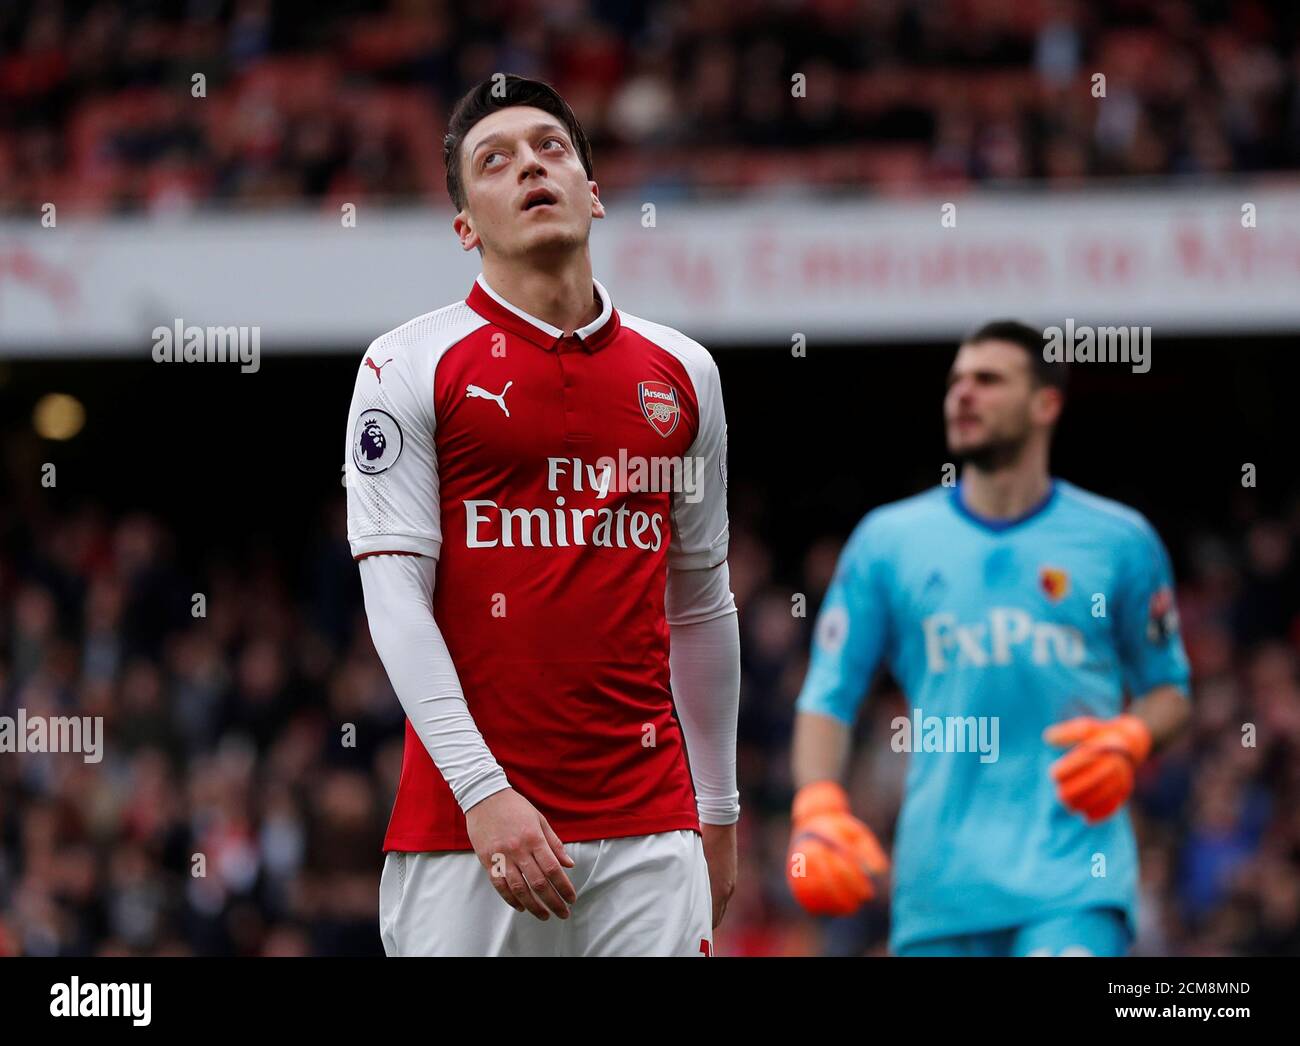 Soccer Football - Premier League - Arsenal vs Watford - Emirates Stadium, London, Britain - March 11, 2018   Arsenal's Mesut Ozil reacts after missing a chance to score               REUTERS/Eddie Keogh    EDITORIAL USE ONLY. No use with unauthorized audio, video, data, fixture lists, club/league logos or "live" services. Online in-match use limited to 75 images, no video emulation. No use in betting, games or single club/league/player publications.  Please contact your account representative for further details. Stock Photo